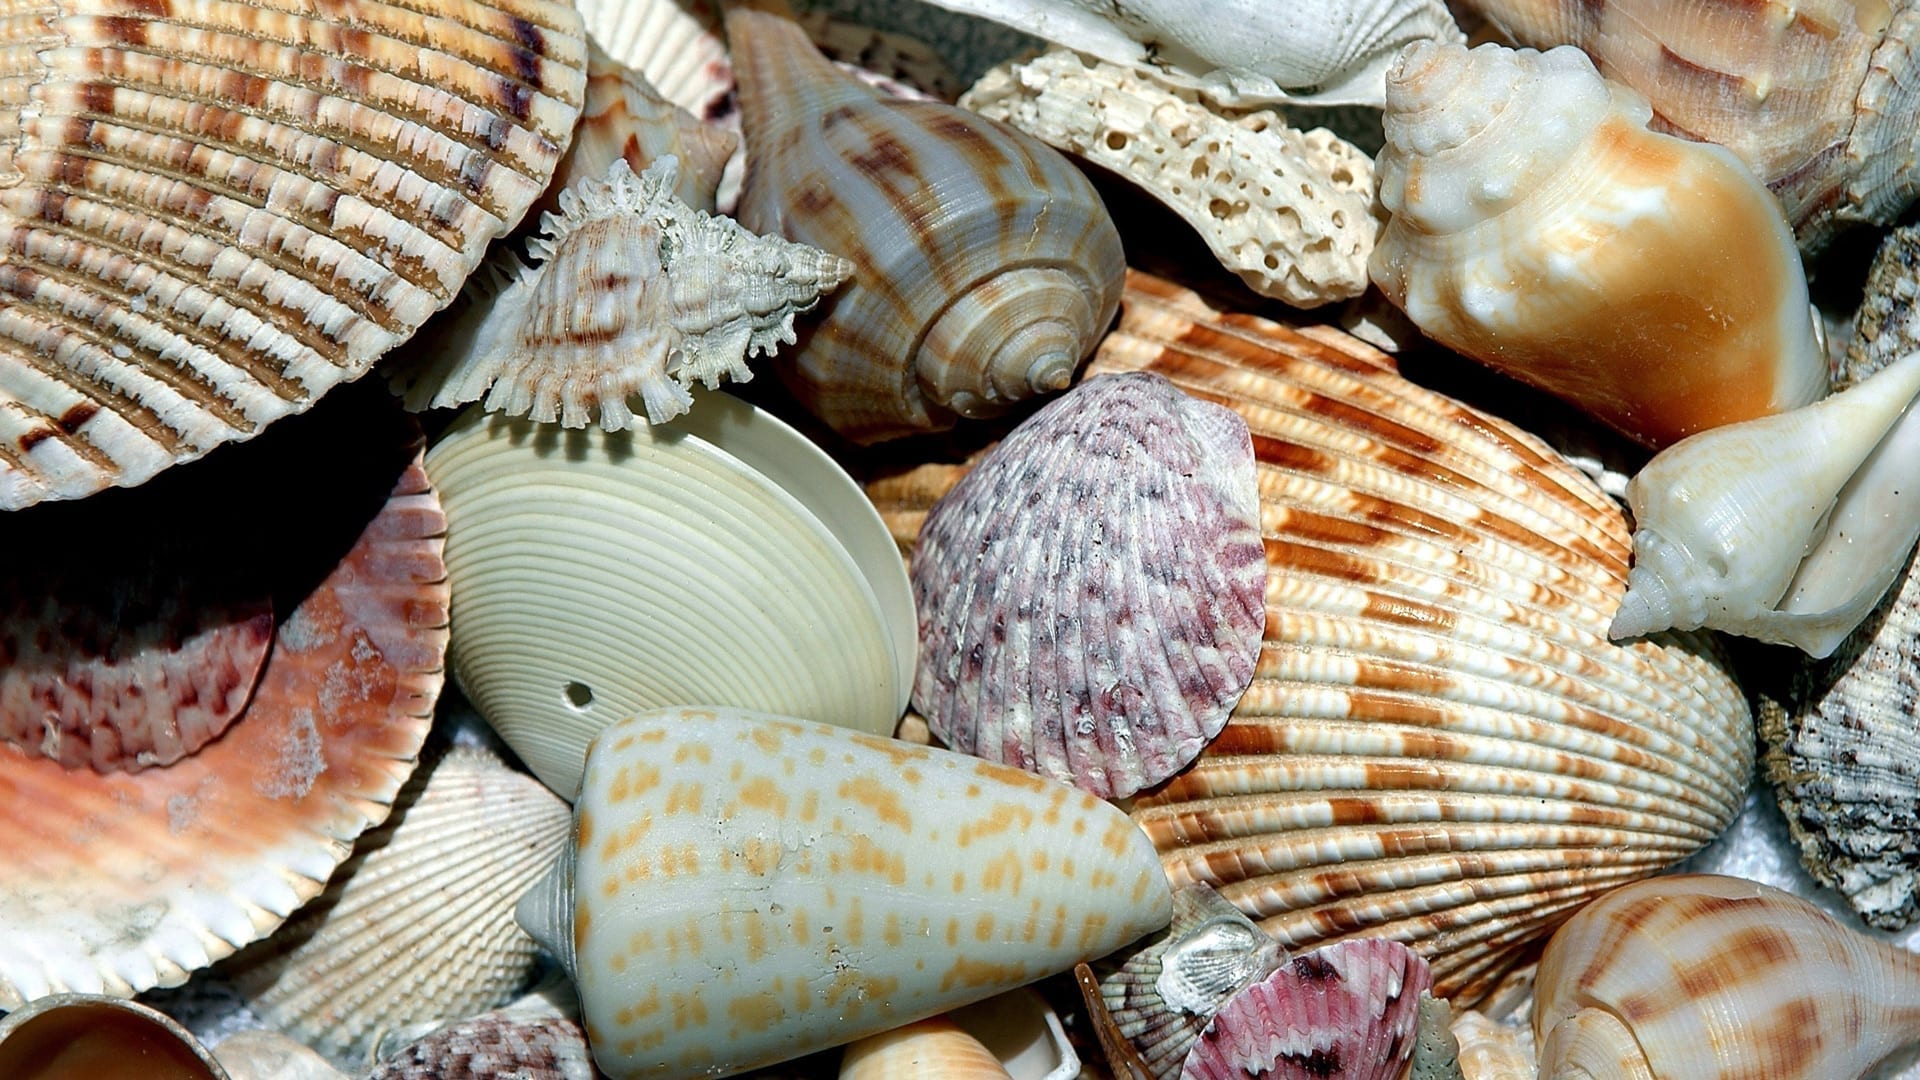 How are seashells made? - Woods Hole Oceanographic Institution